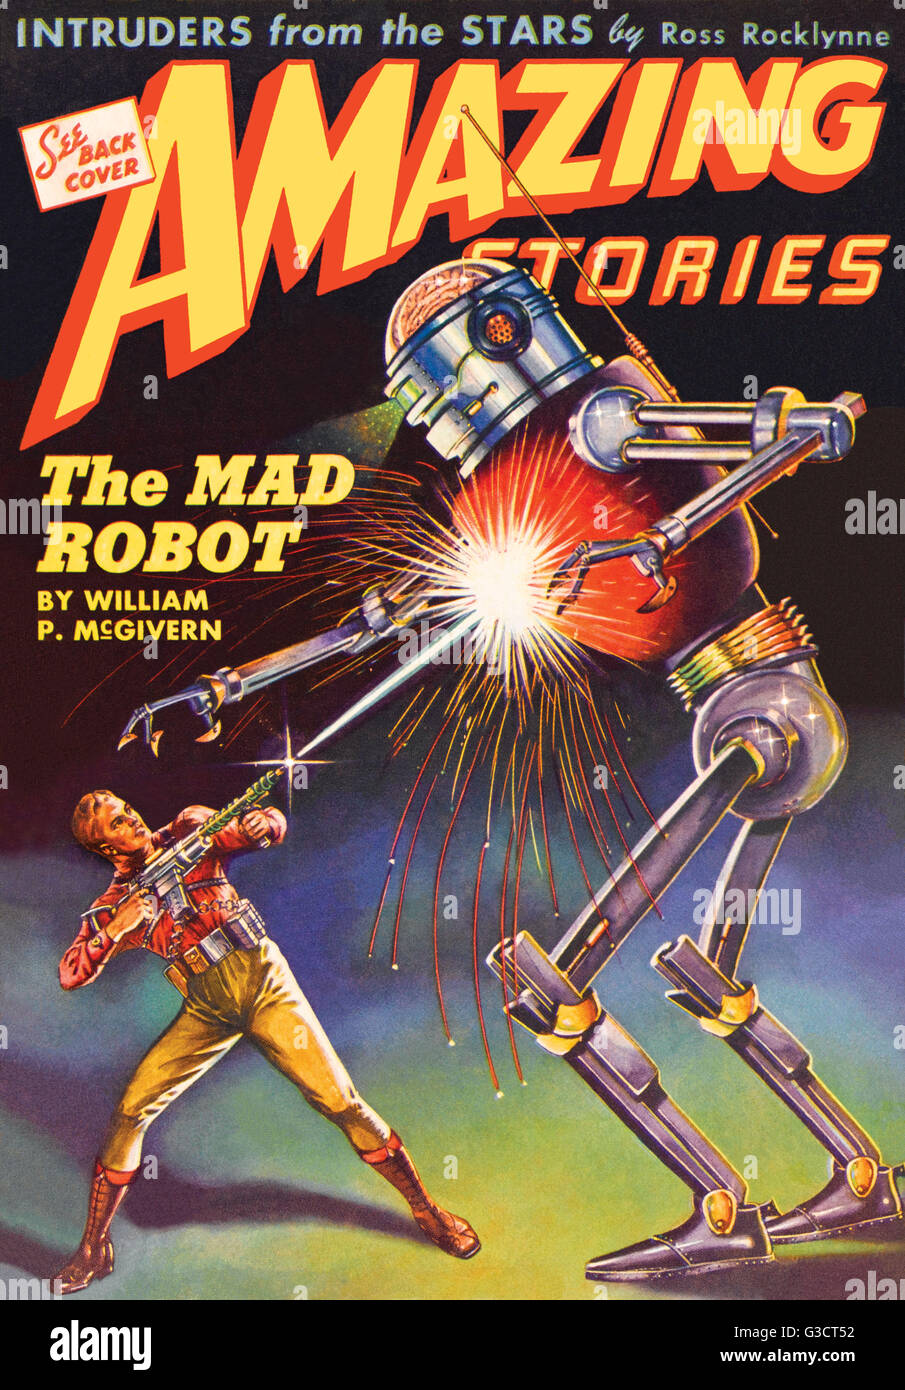 the-mad-robot-by-william-p-mcgivern-a-br